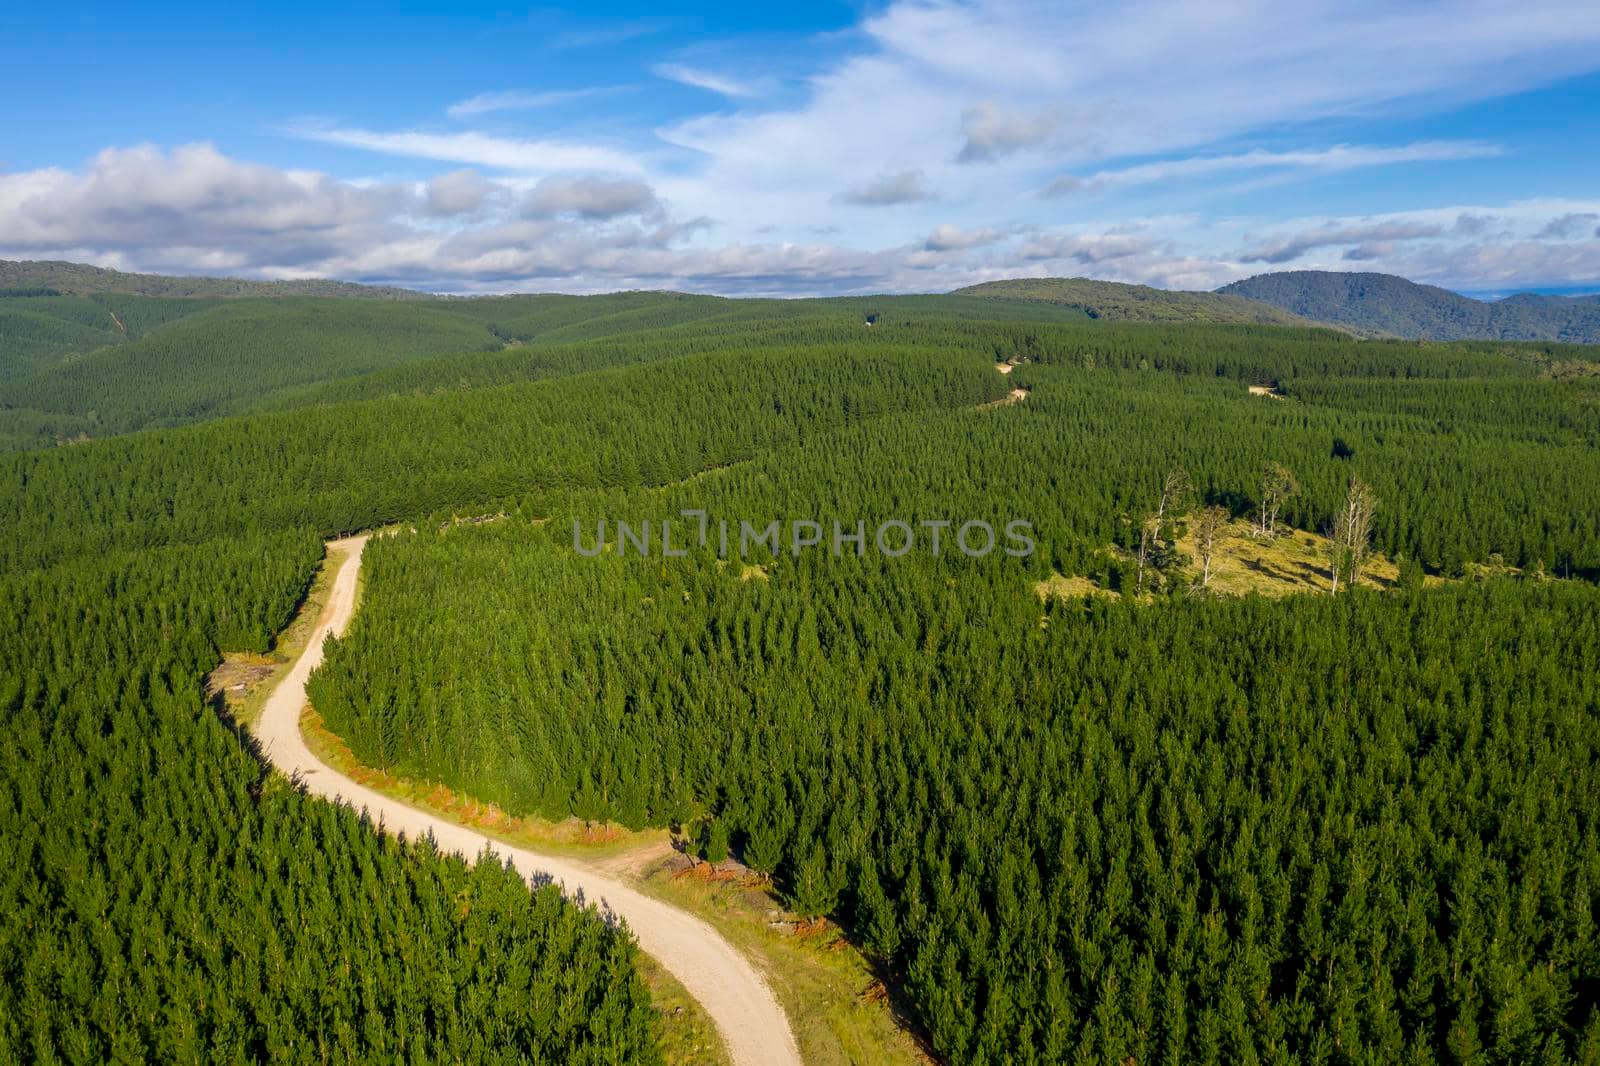 Aerial view of a large pine tree farm in a valley in regional Australia by WittkePhotos